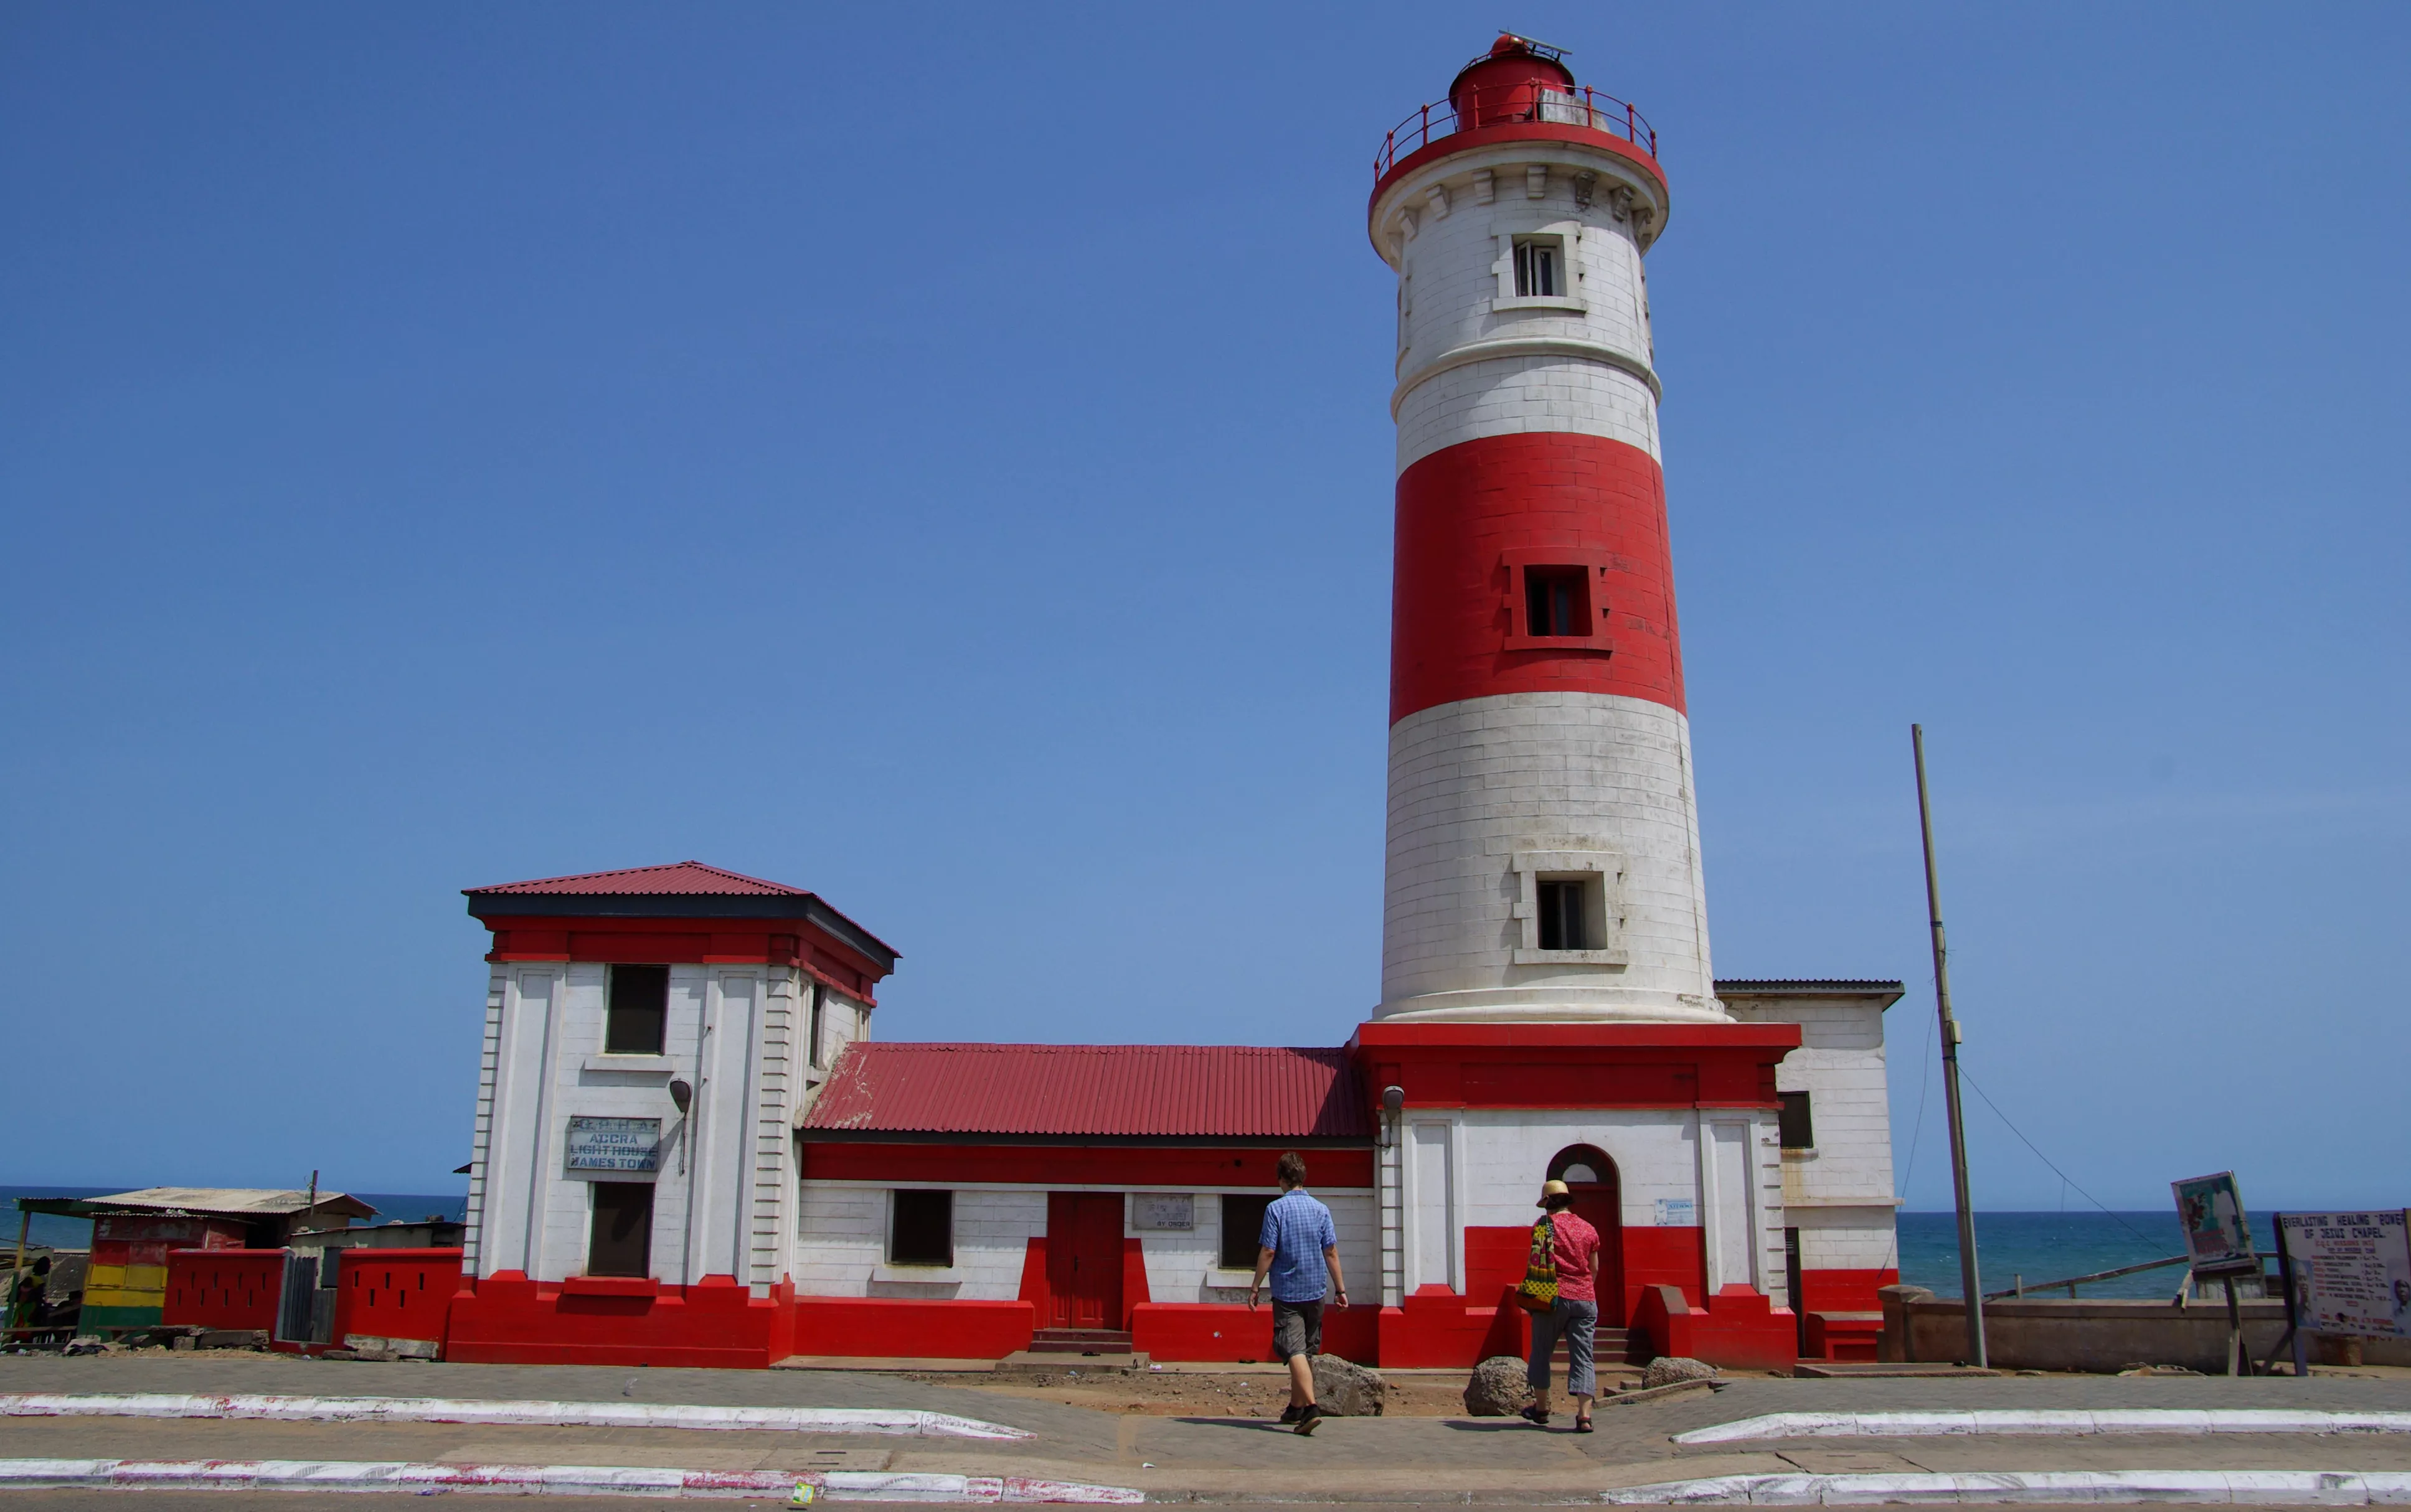 Jamestown Lighthouse in Ghana, Africa | Architecture - Rated 3.3